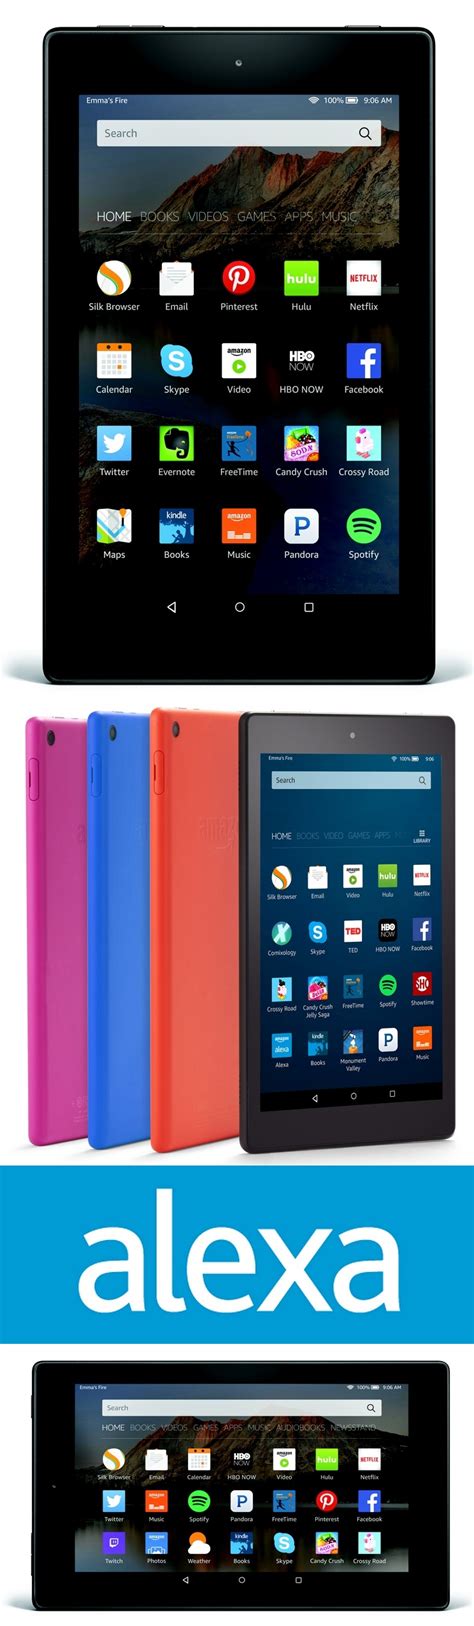 The New Amazon Fire Hd 8 Tablet Has Twice The Storage 16gb Or 32gb